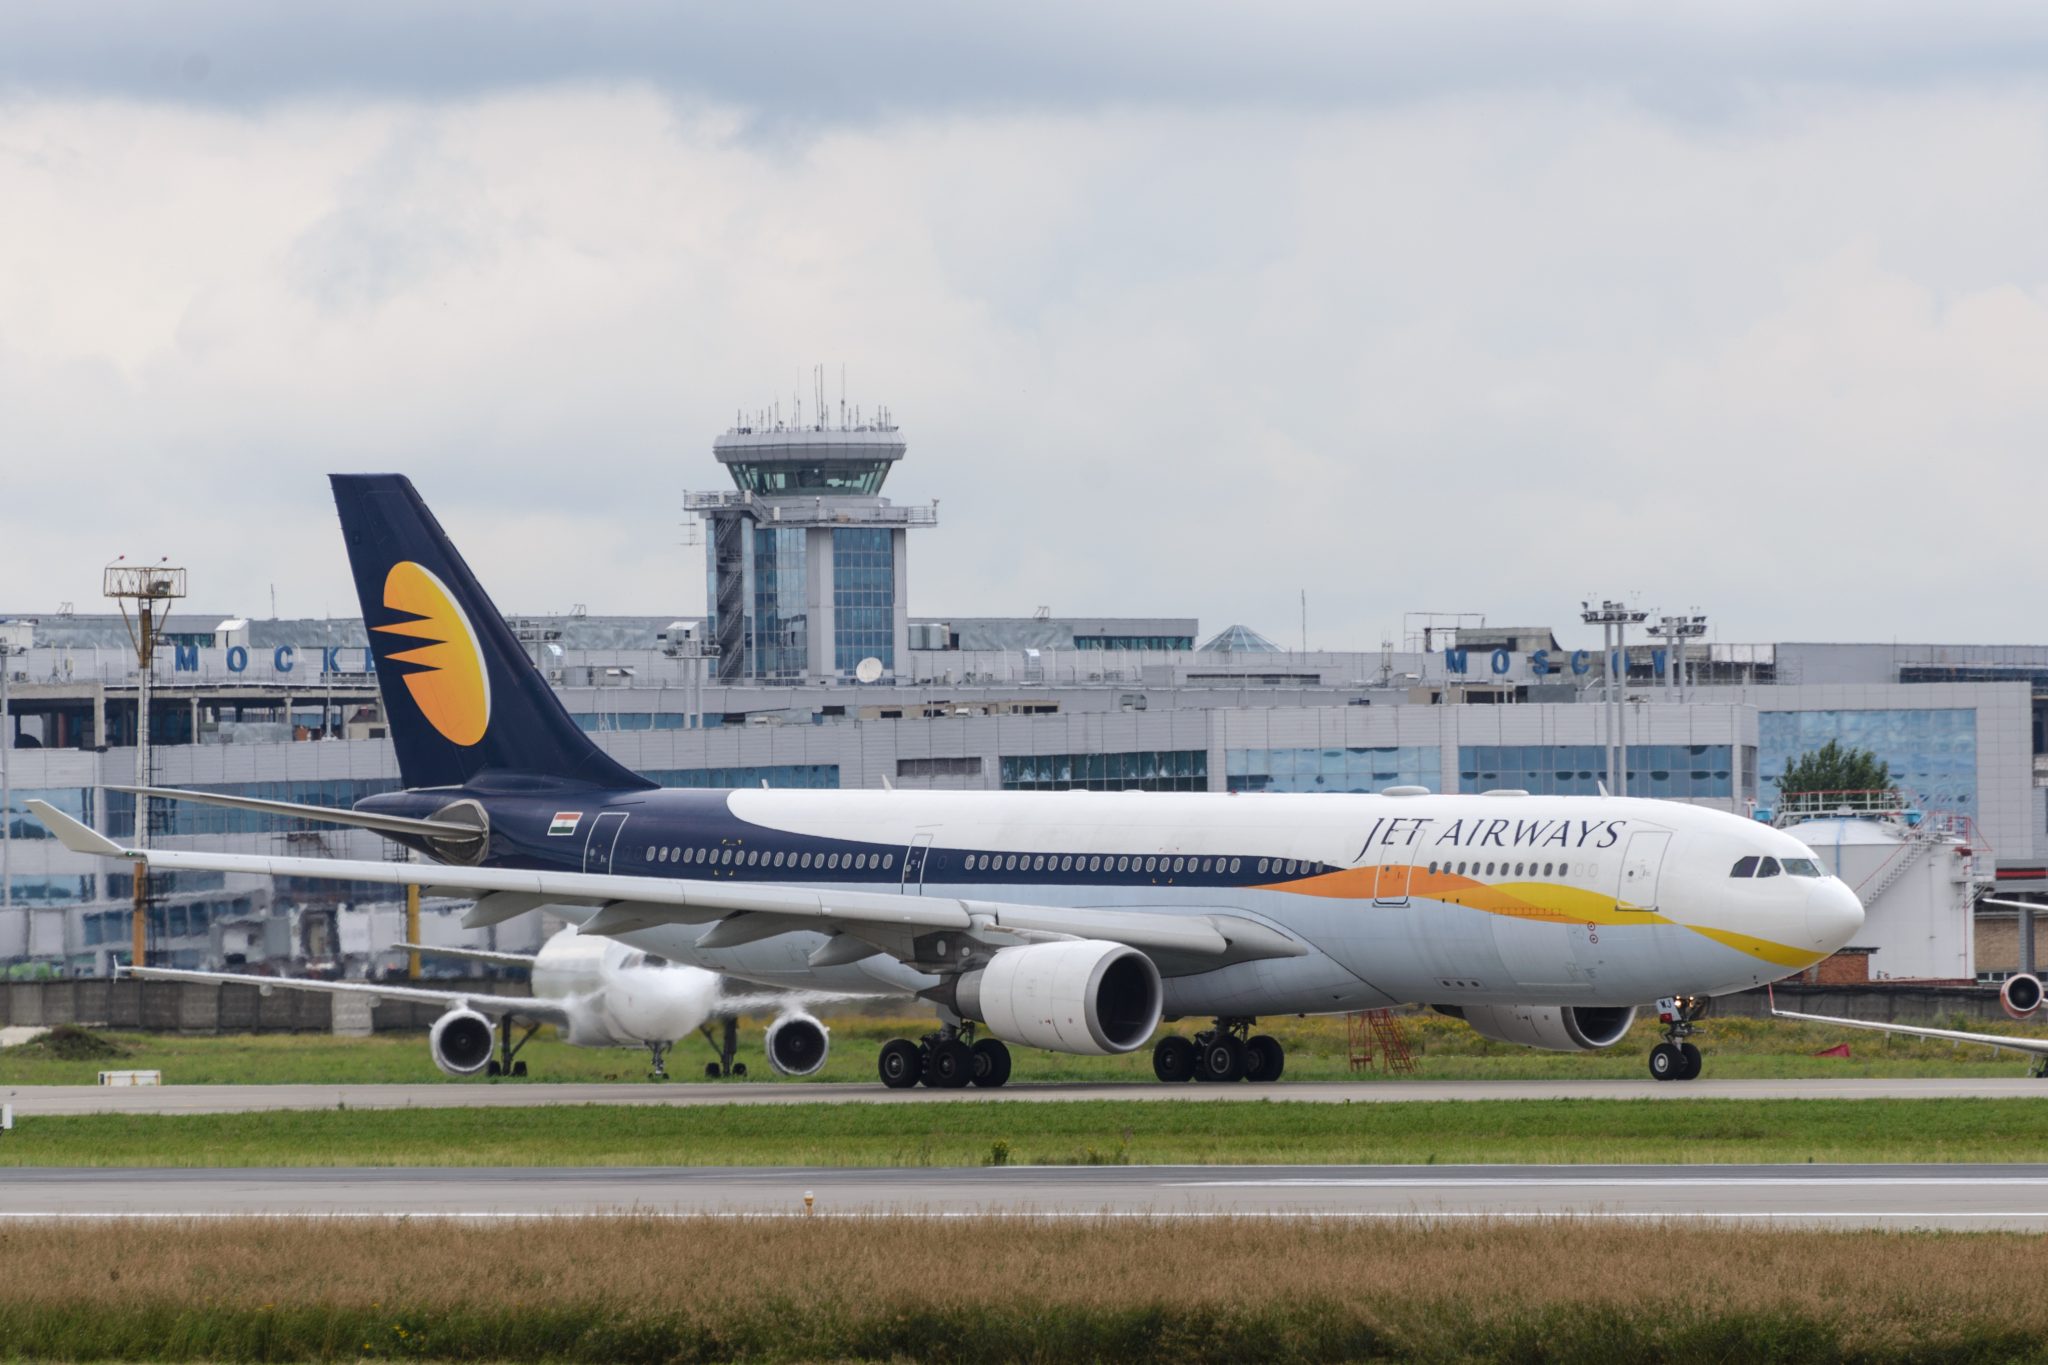 Jet Airways 2.0 – The bumpy road ahead of the big launch